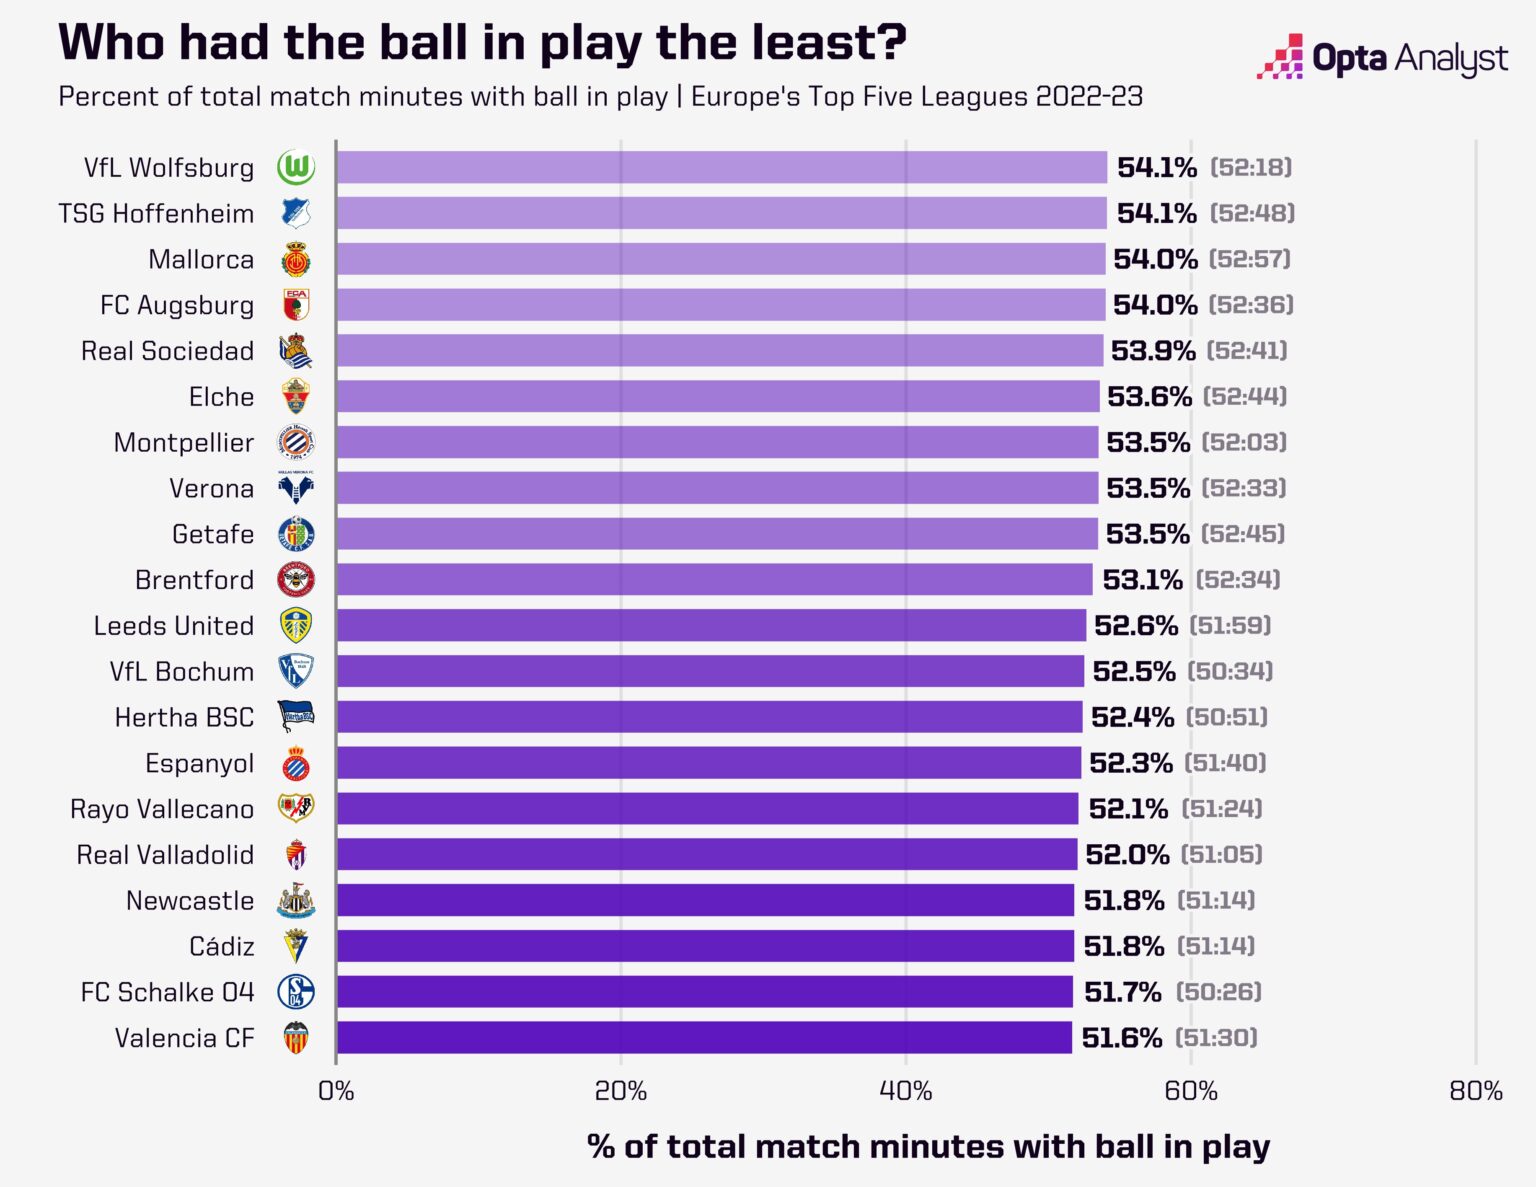 top-5-leagues-least-ball-in-play-1536x11